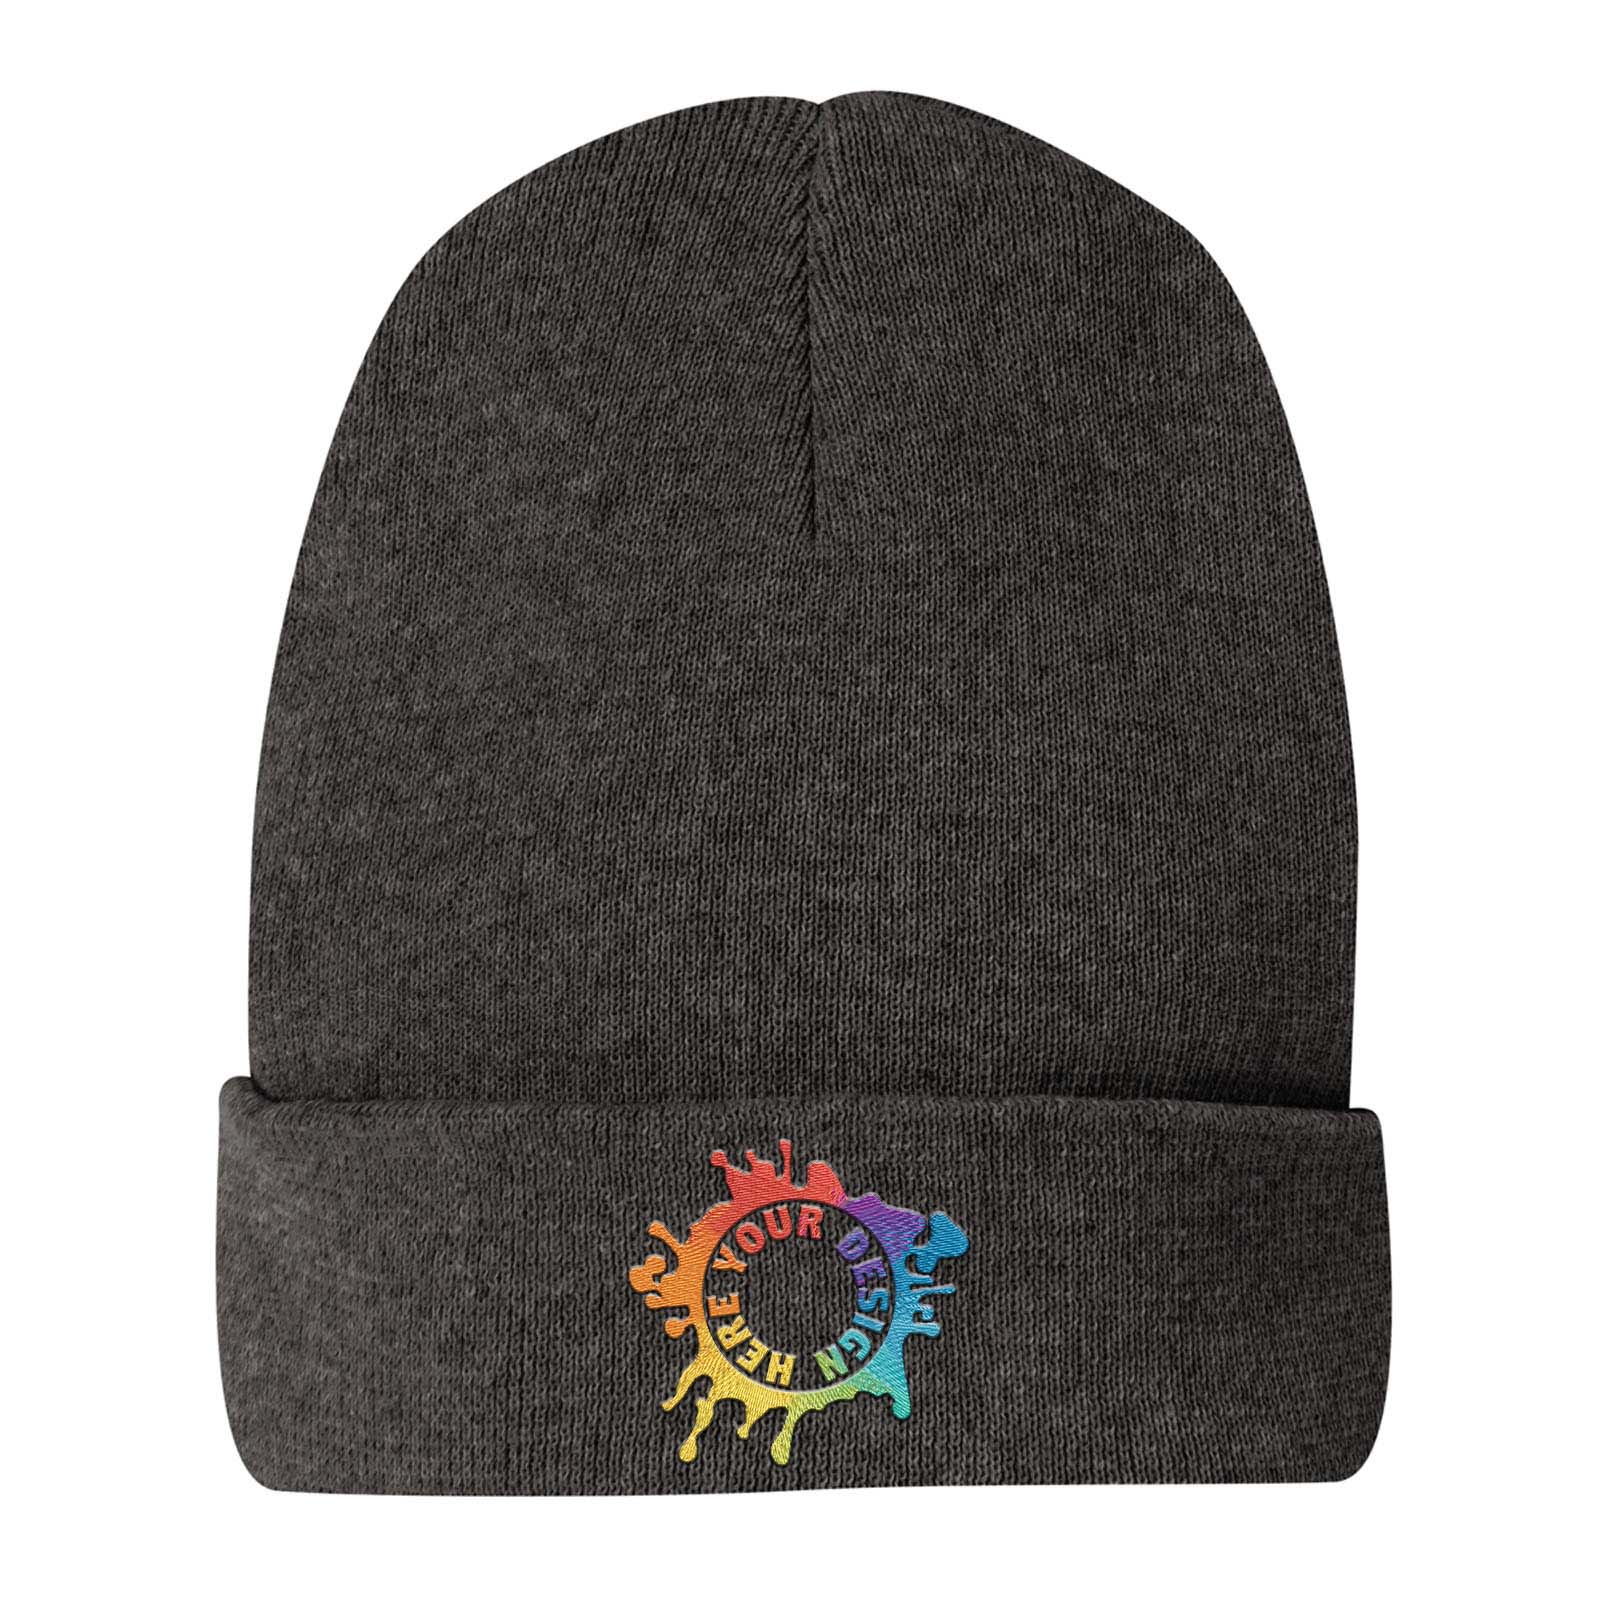 Embroidered District® Re-Beanie™ - Mato & Hash